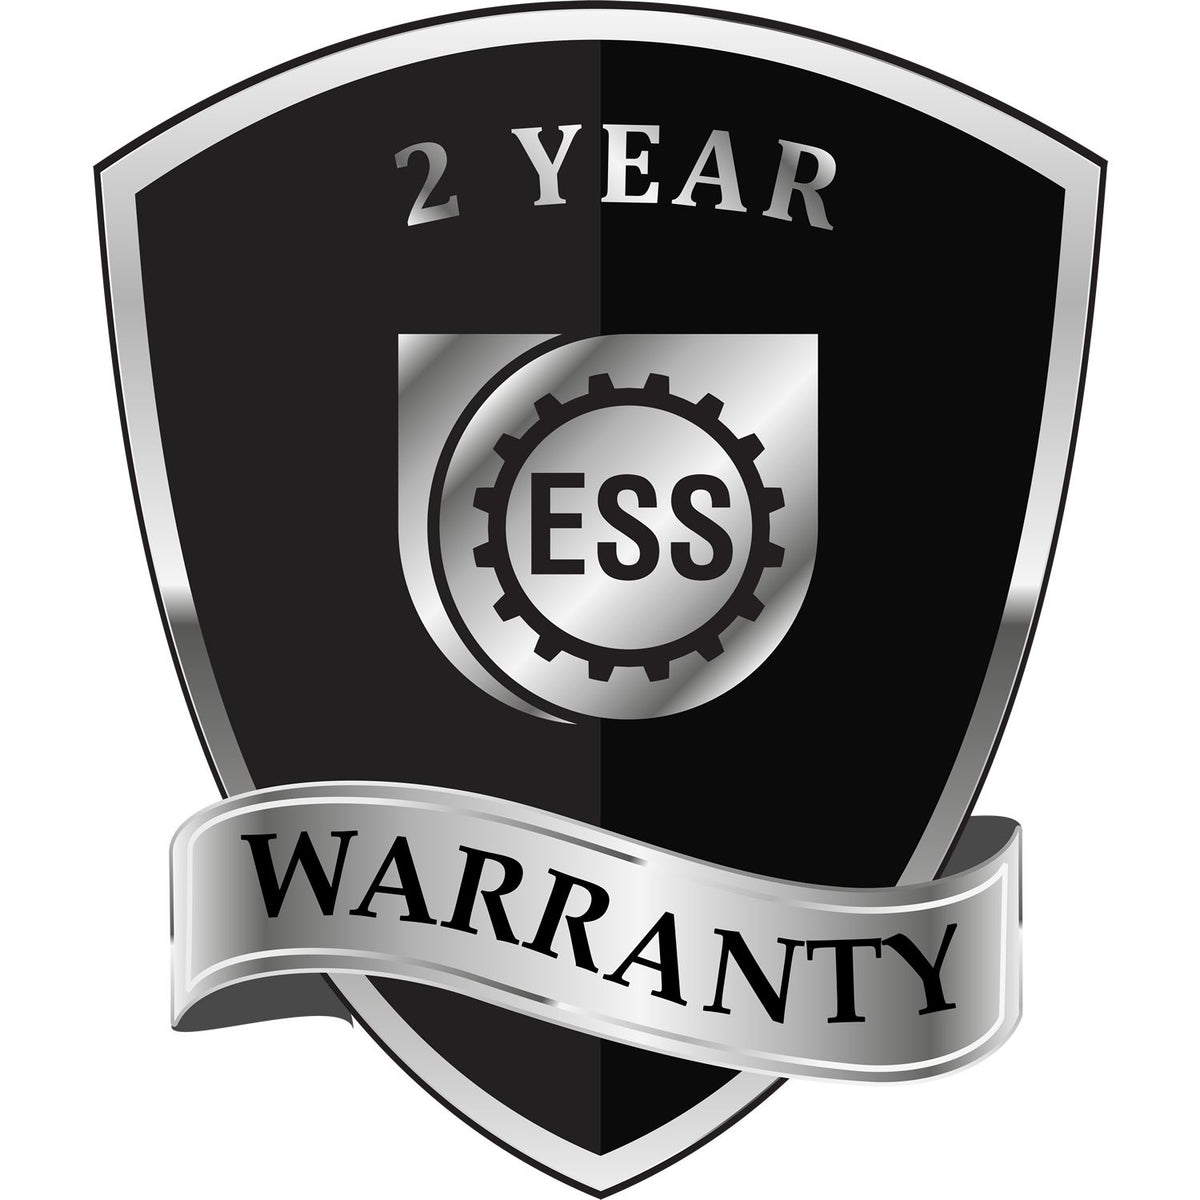 A badge or emblem showing a warranty icon for the Handheld Alabama Professional Engineer Embosser